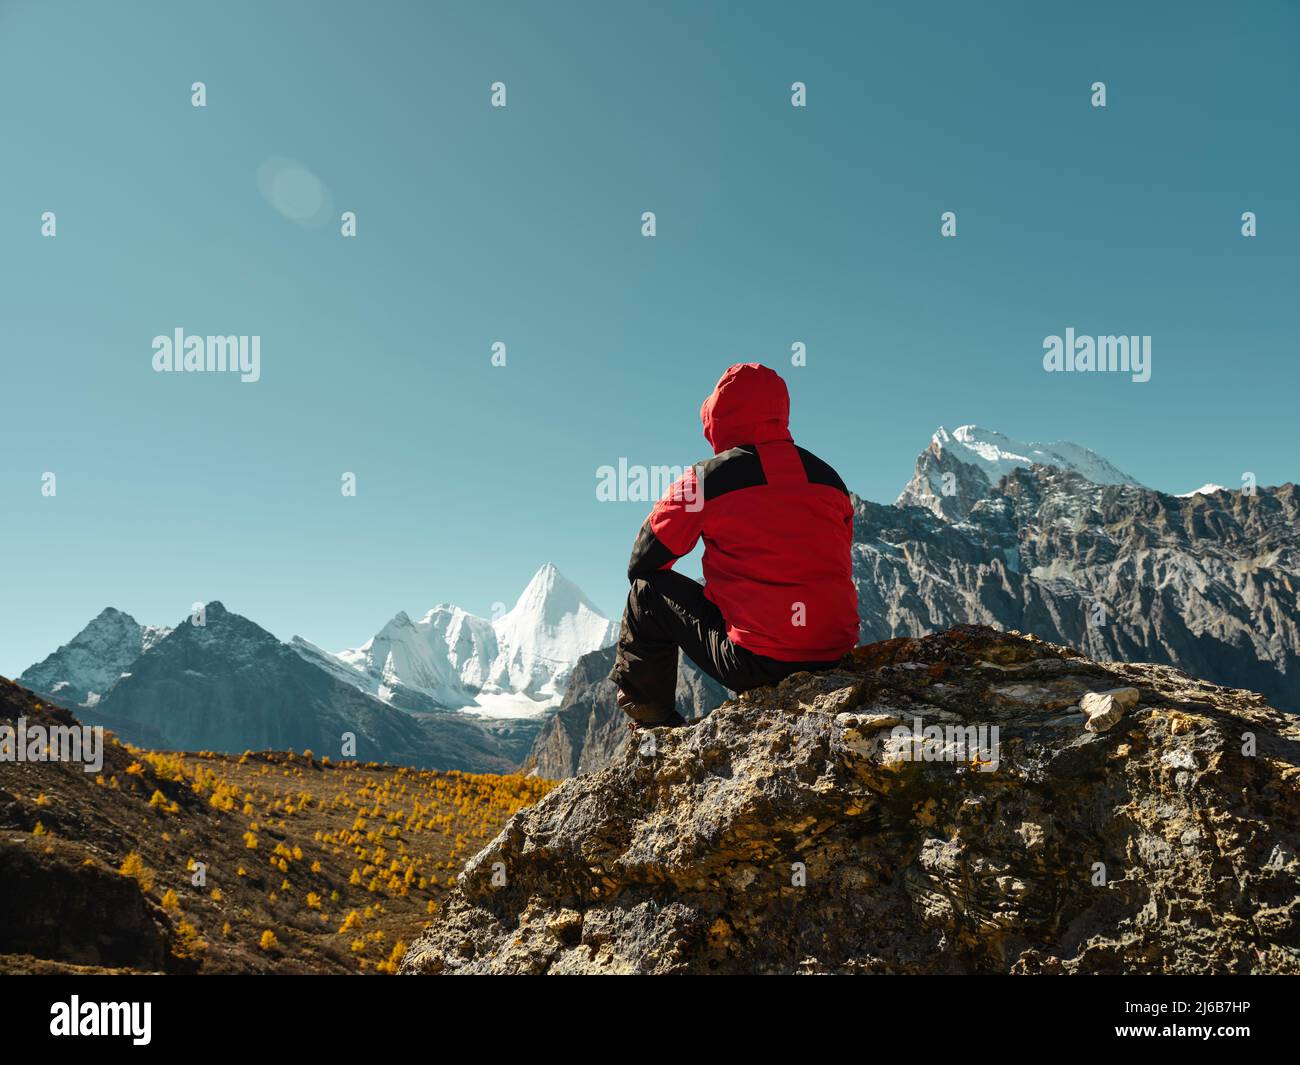 rear view of asian man sitting on top of rock with Yangmaiyong (or Jampayang in Tibetan) mountain peak in the distance in Yading, Daocheng County, Sic Stock Photo